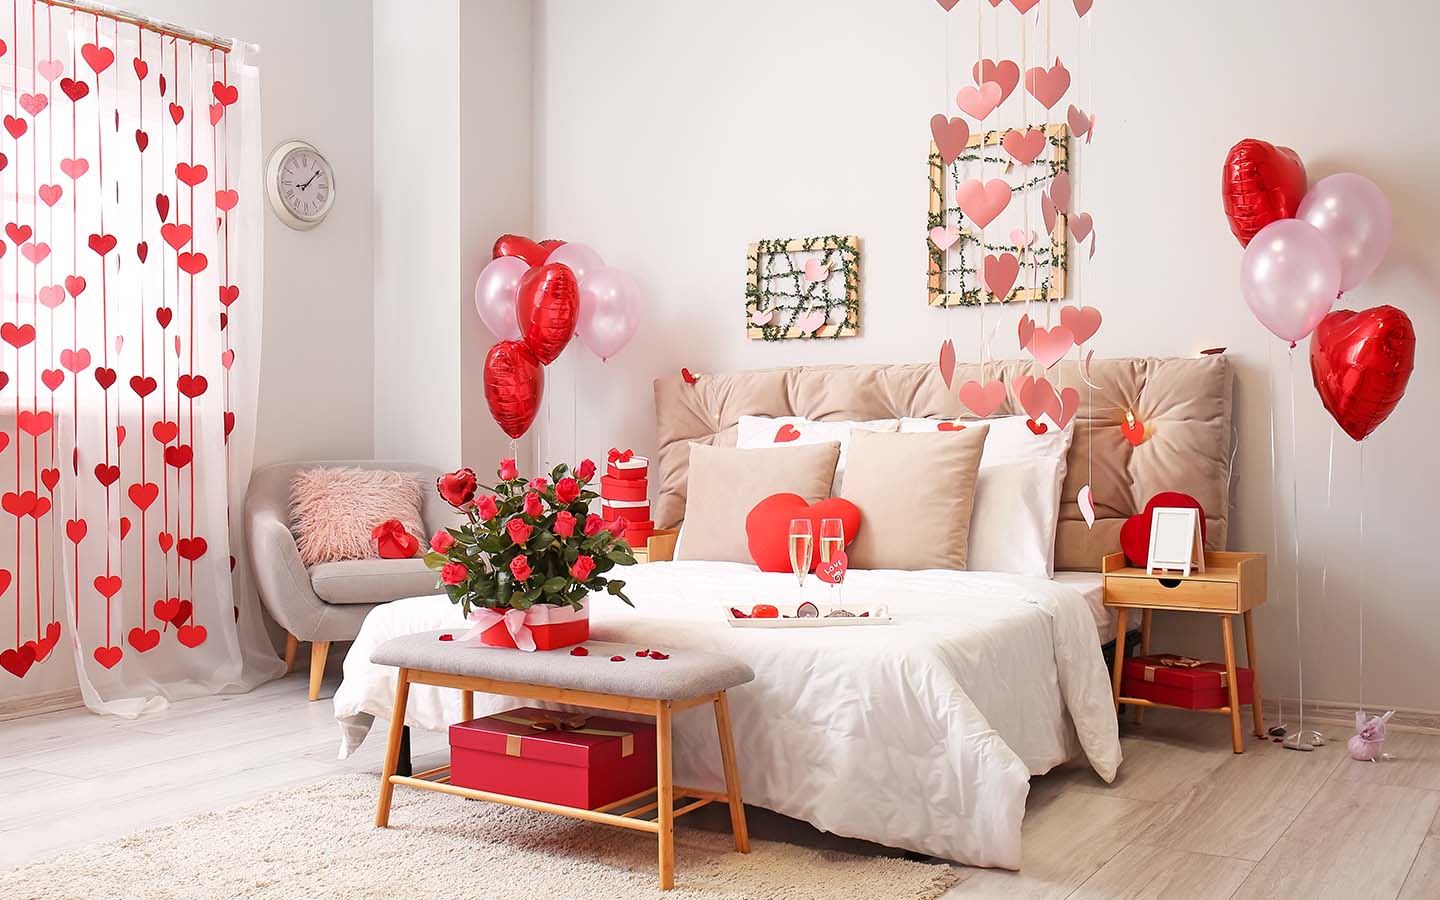 decorate your home if planning a Valentine's Day celebration at home